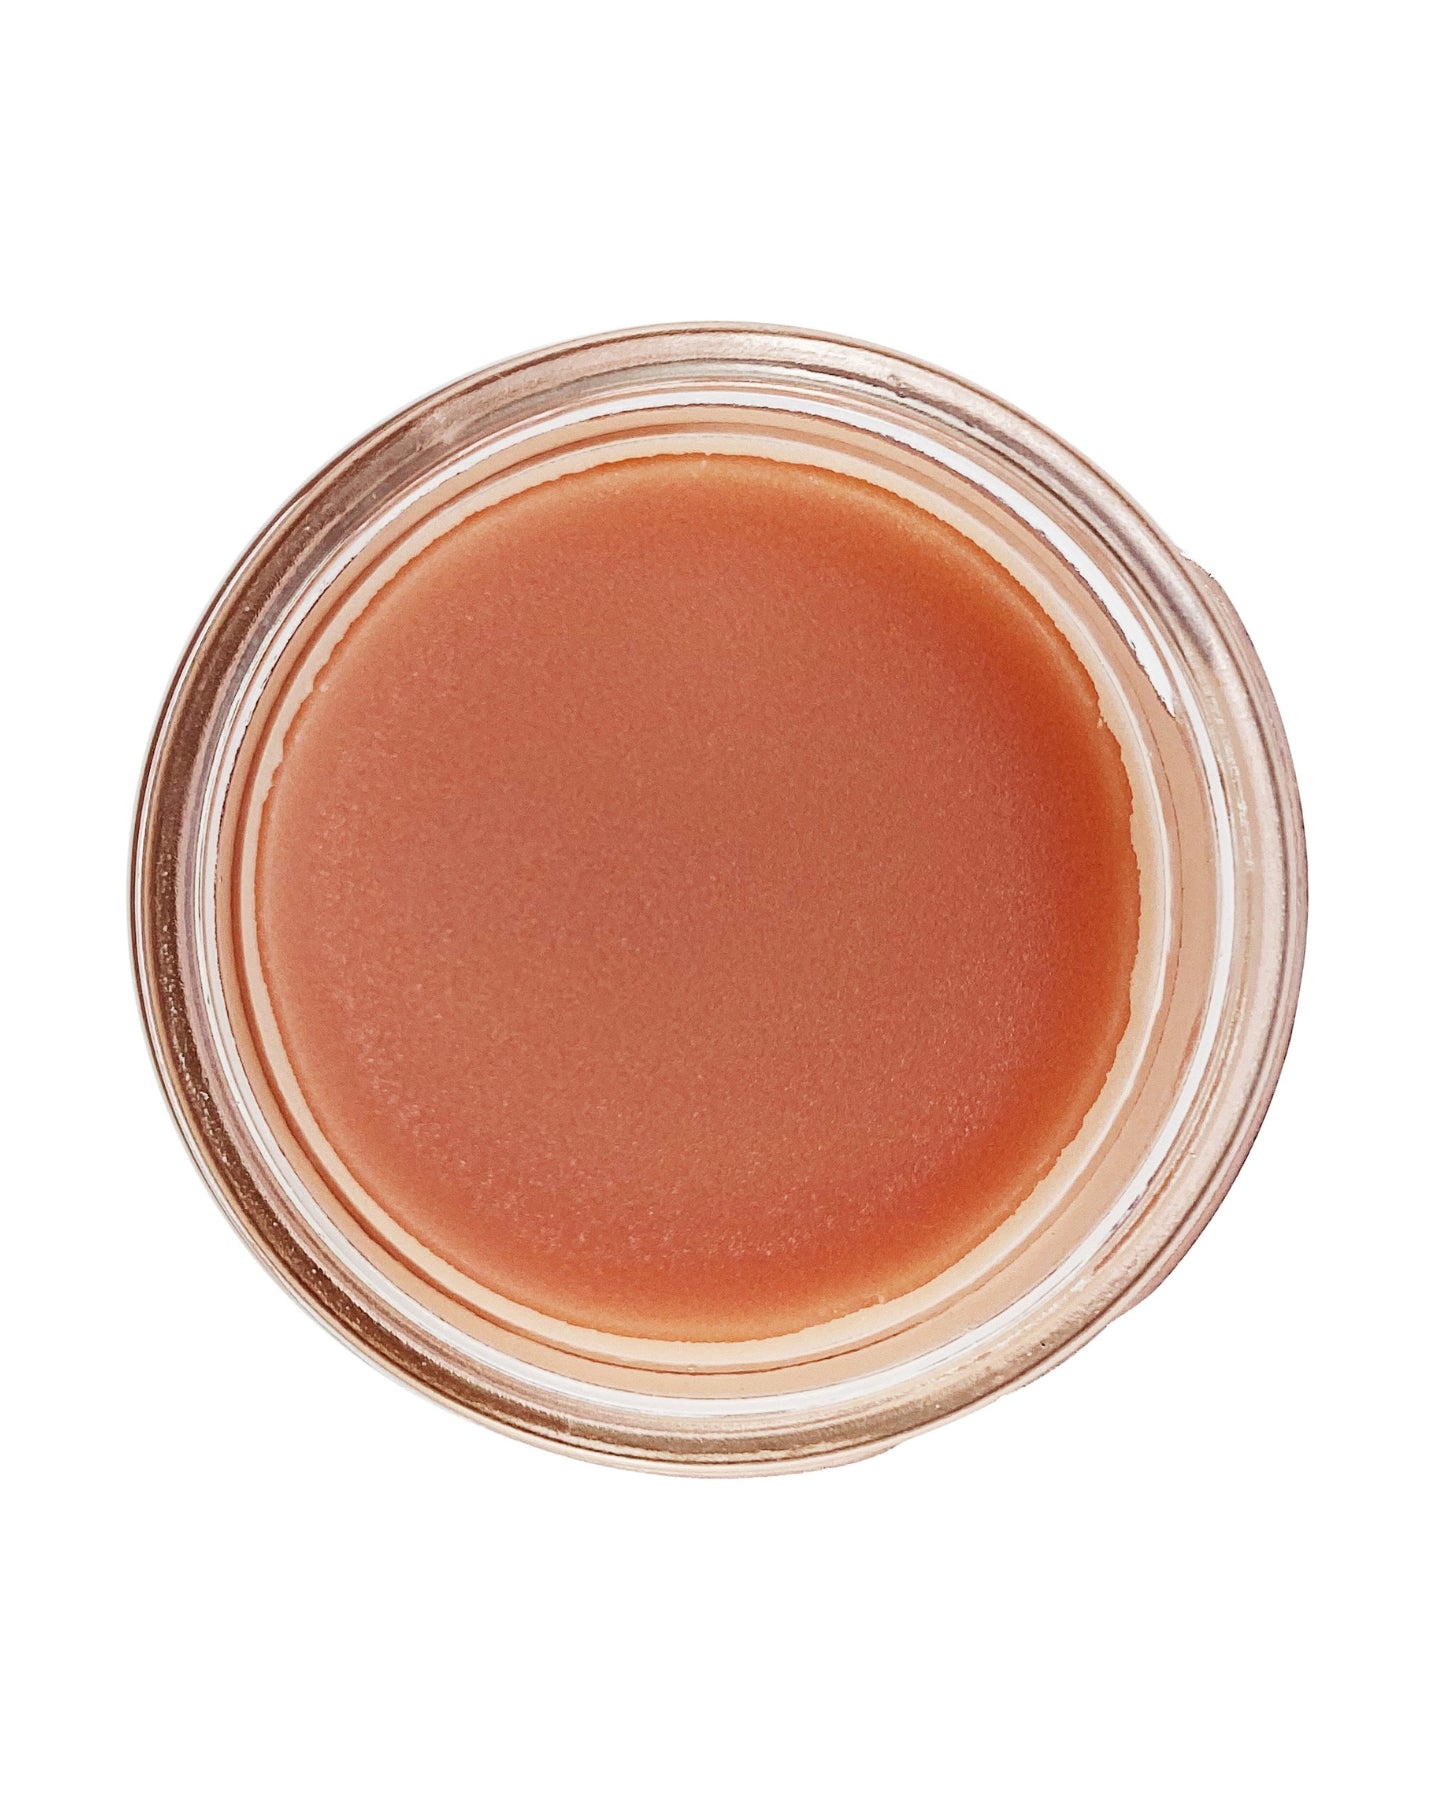 A close-up shot of the Sweet Dreams Glow Balm, enlarged to show texture.